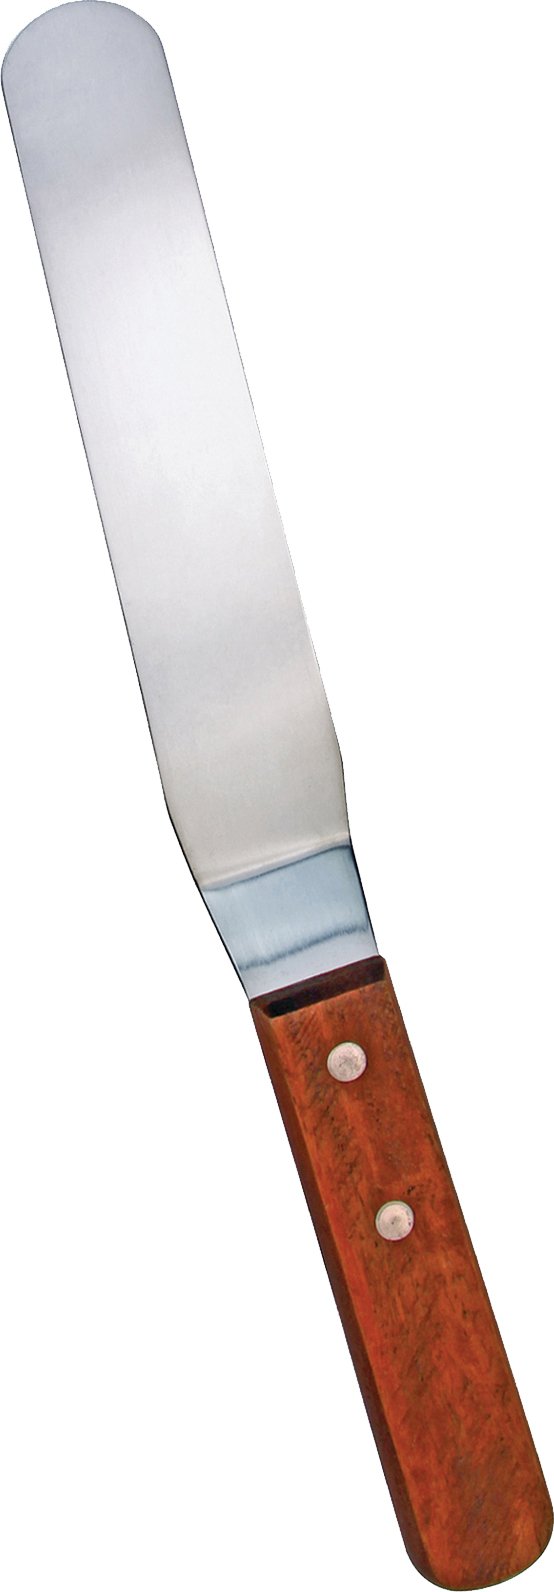 Omcan - 6.5” x 1 5/16” Offset Spatula with Stainless Steel Blade & Wood Handle, 50/cs - 80144